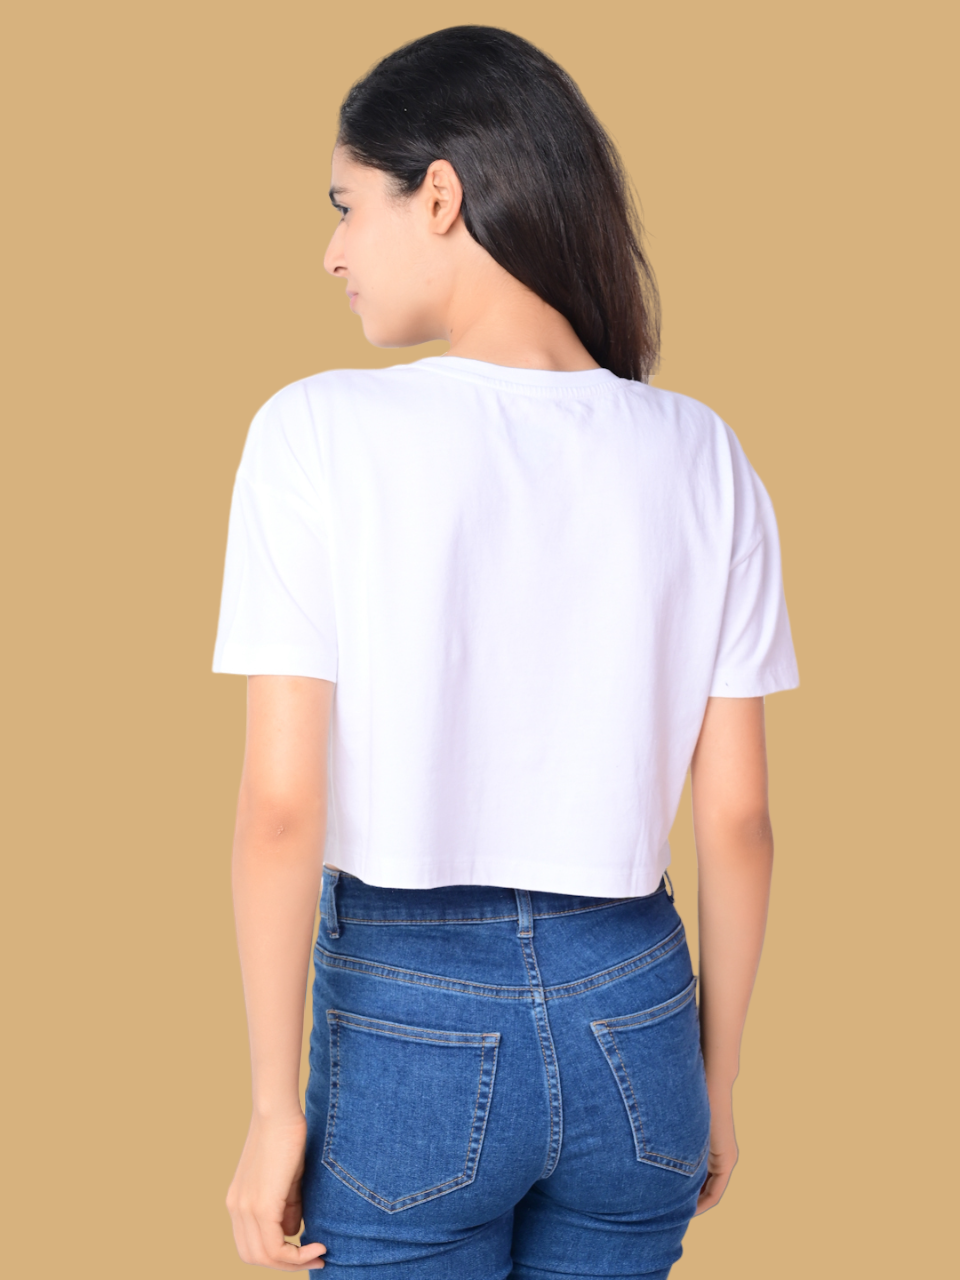 Flawless Women Wing White Crop Top Being Flawless